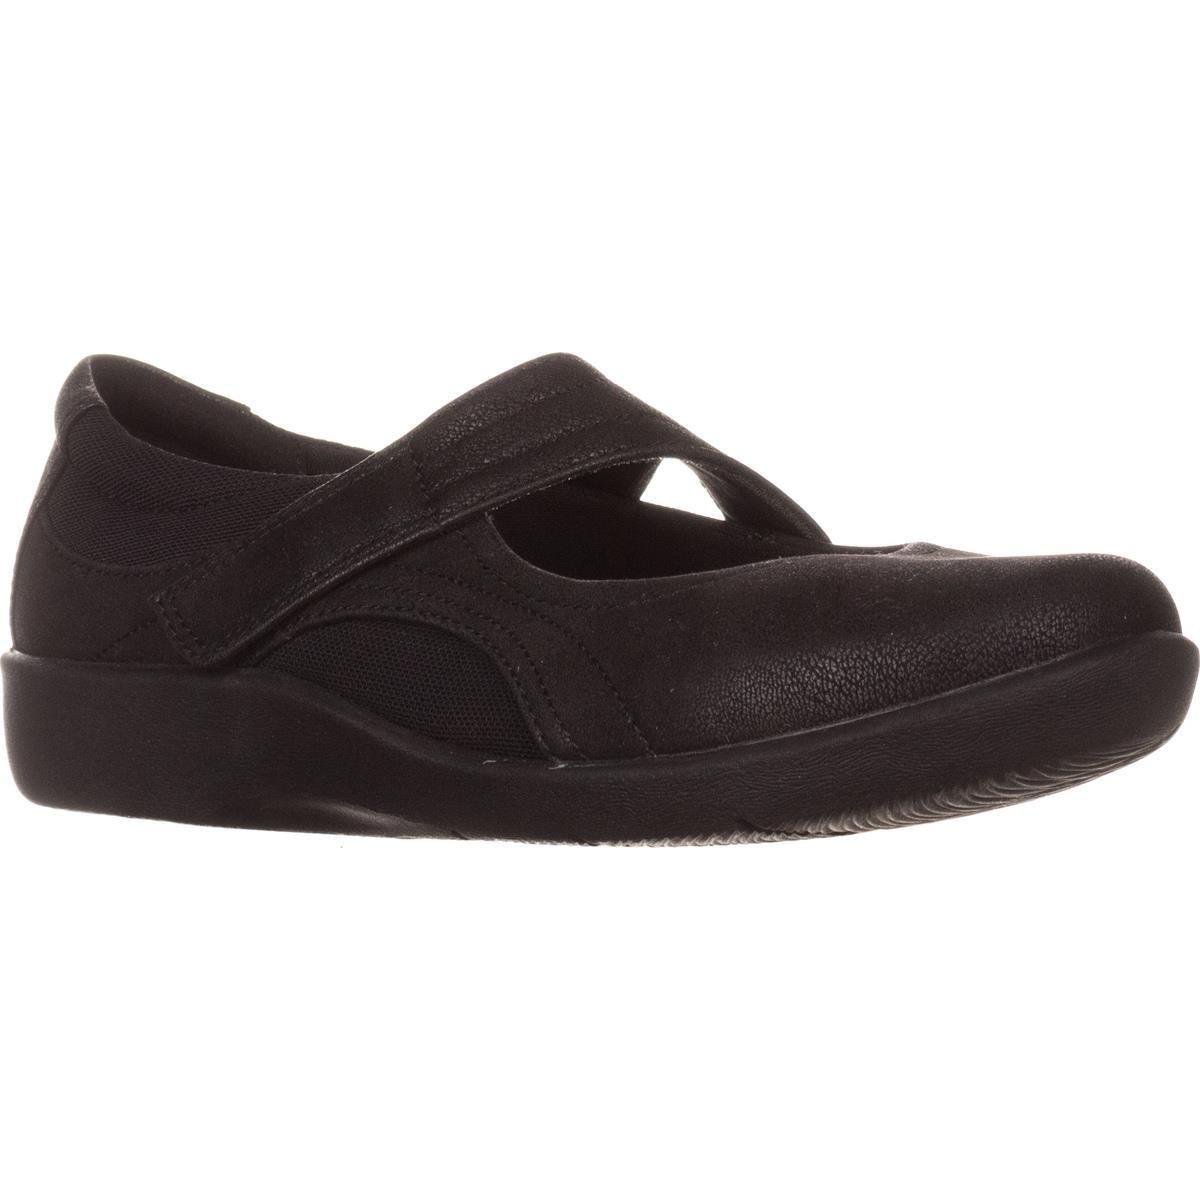 Clarks Synthetic Cloudsteppers Sillian Bella Mary Jane Flats, Black - Lyst